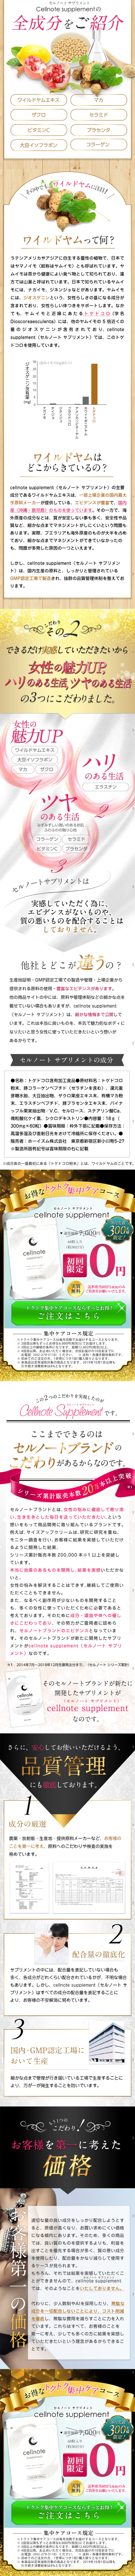 Cellnote supplement_sp_2